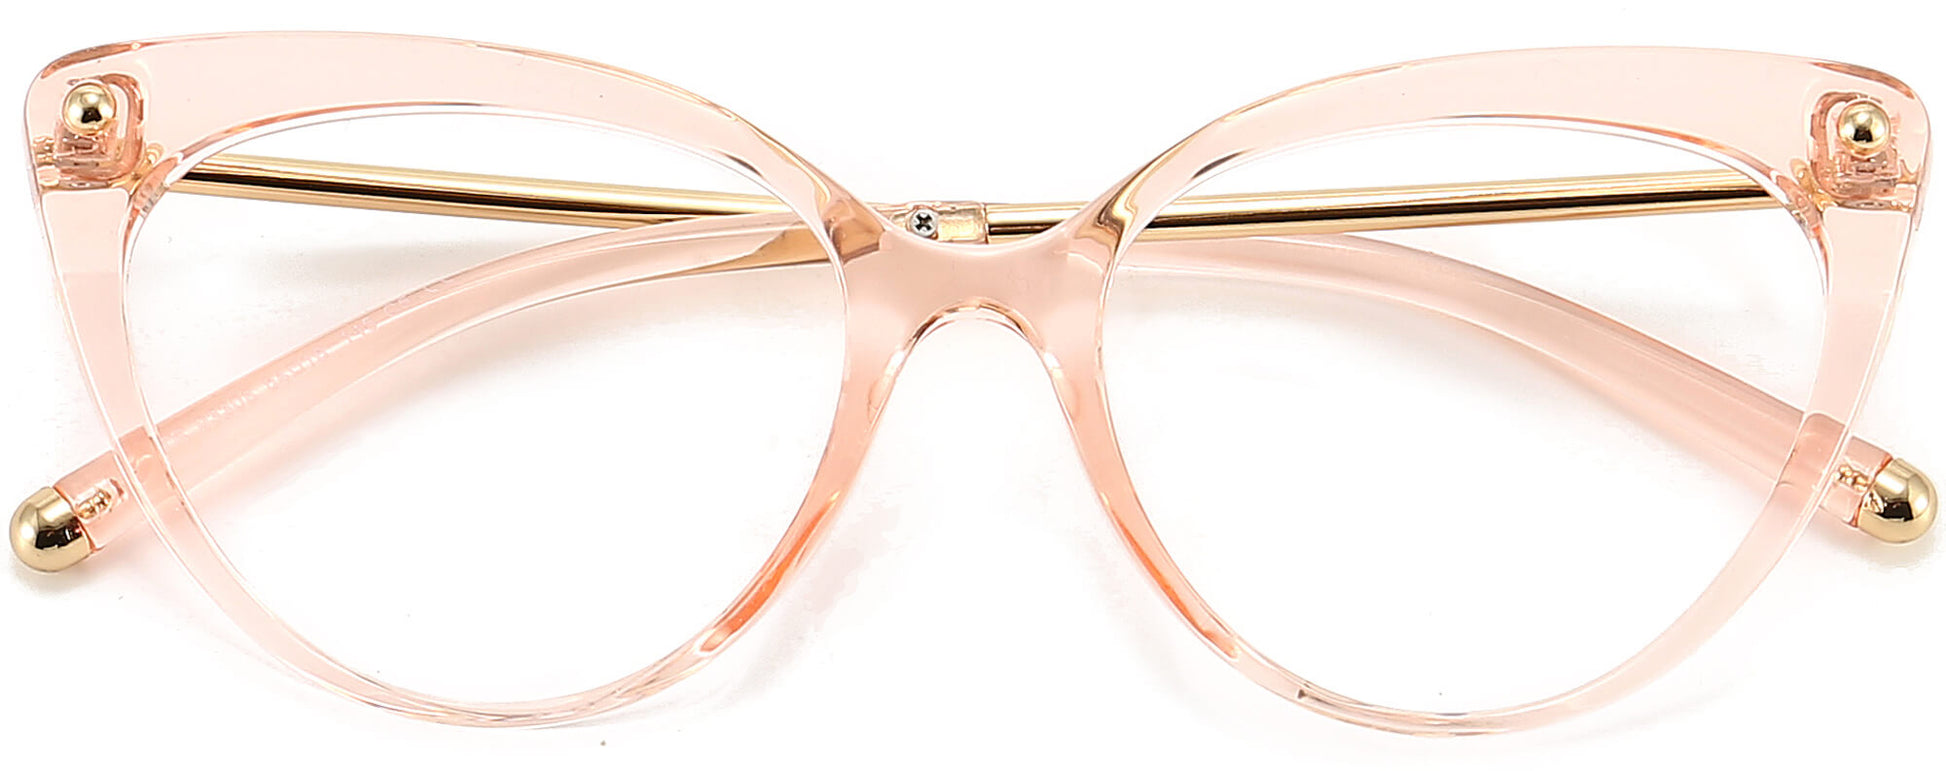 Leona Cateye Pink Eyeglasses from ANRRI, closed view